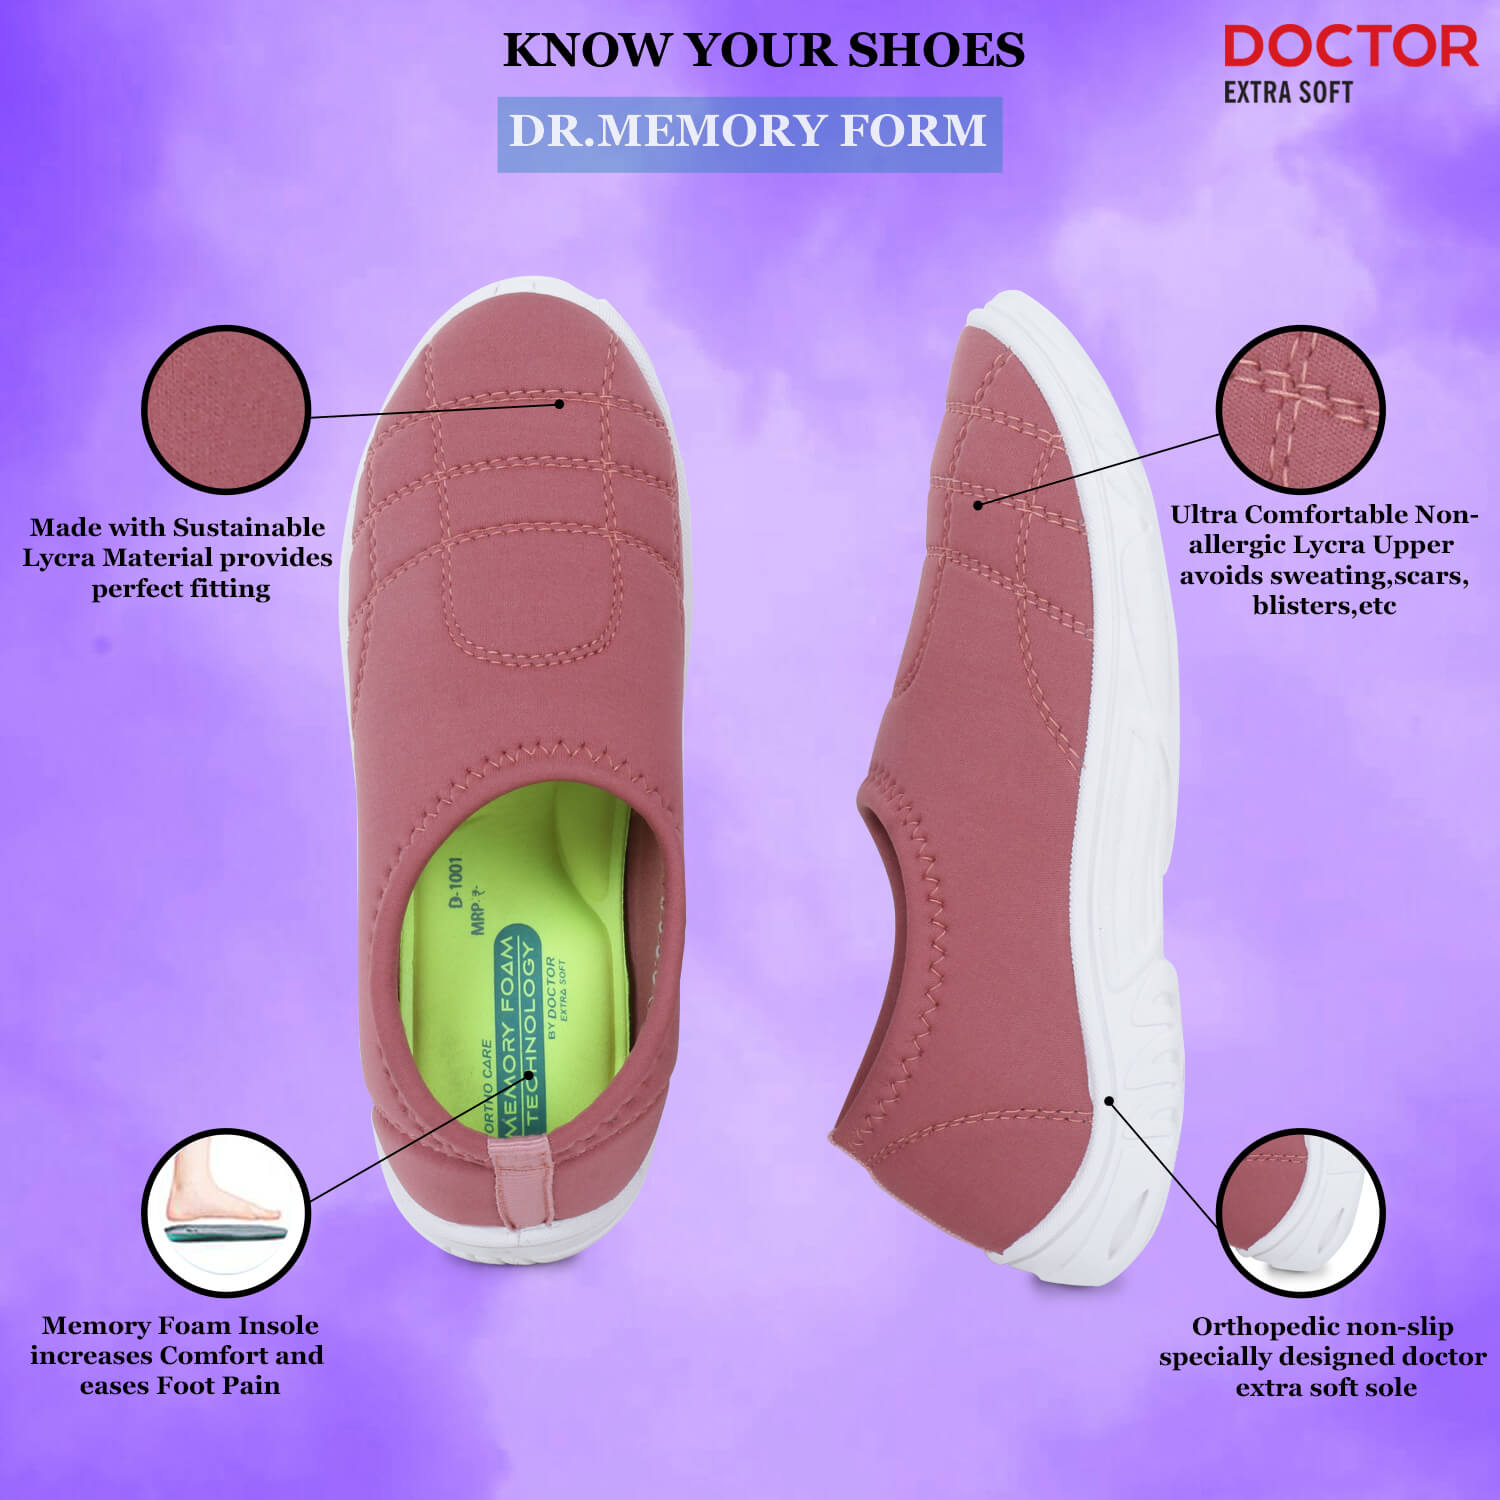 BATA CHAPPAL SLIPPERS SHOES WOMEN FOOTWEAR COLLECTION IMAGES FOR LADIES  CAUSAL FORMAL FOOTWEAR - YouTube | Slipper shoes women, Arch support shoes, Bata  shoes